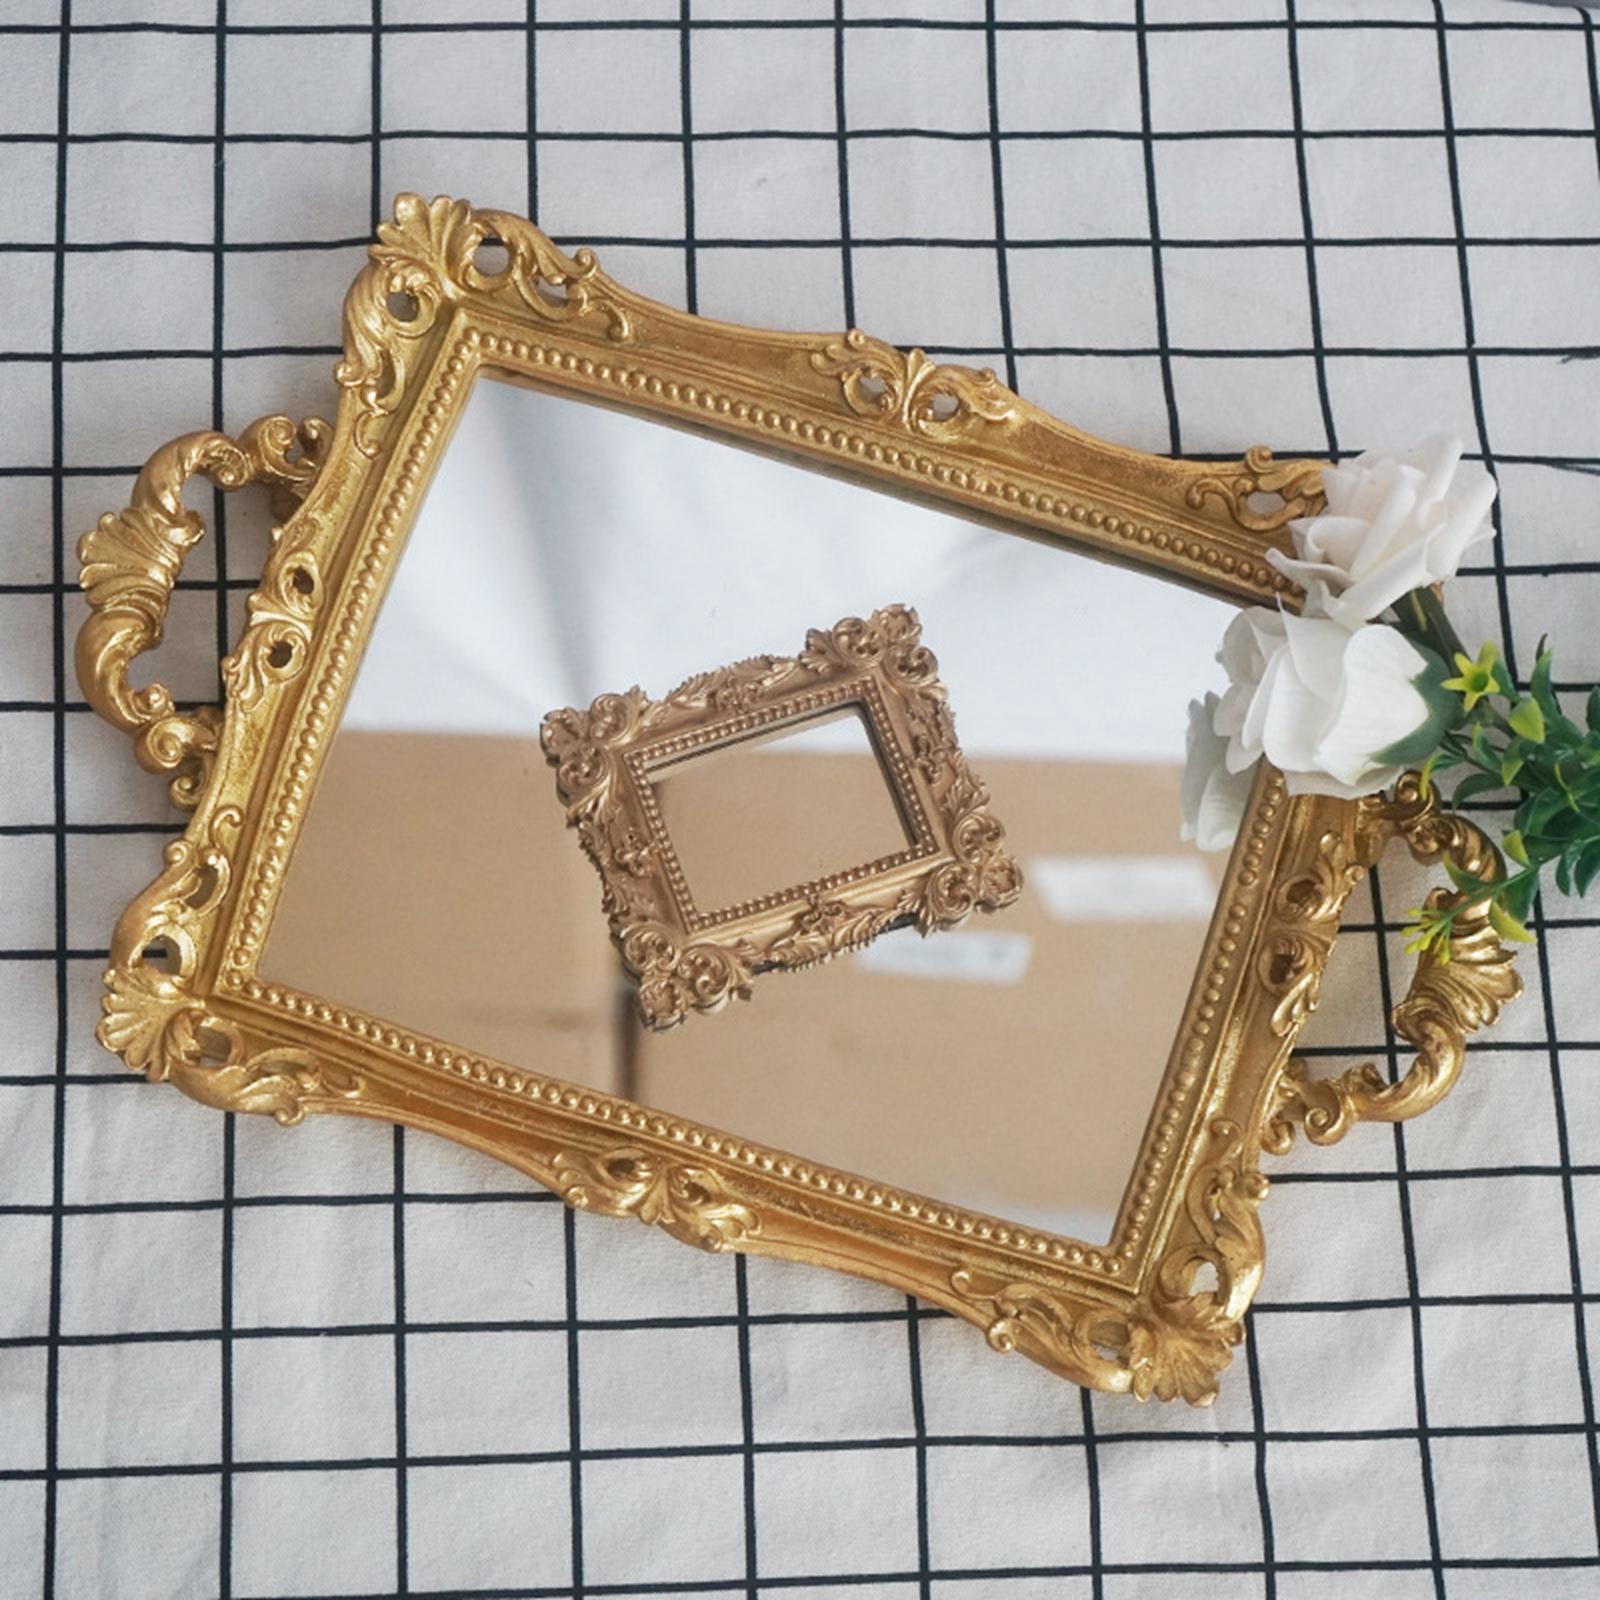 Ornate Vanity Mirror Tray Cosmetic Storage Tray Serving Tray for Home Decor